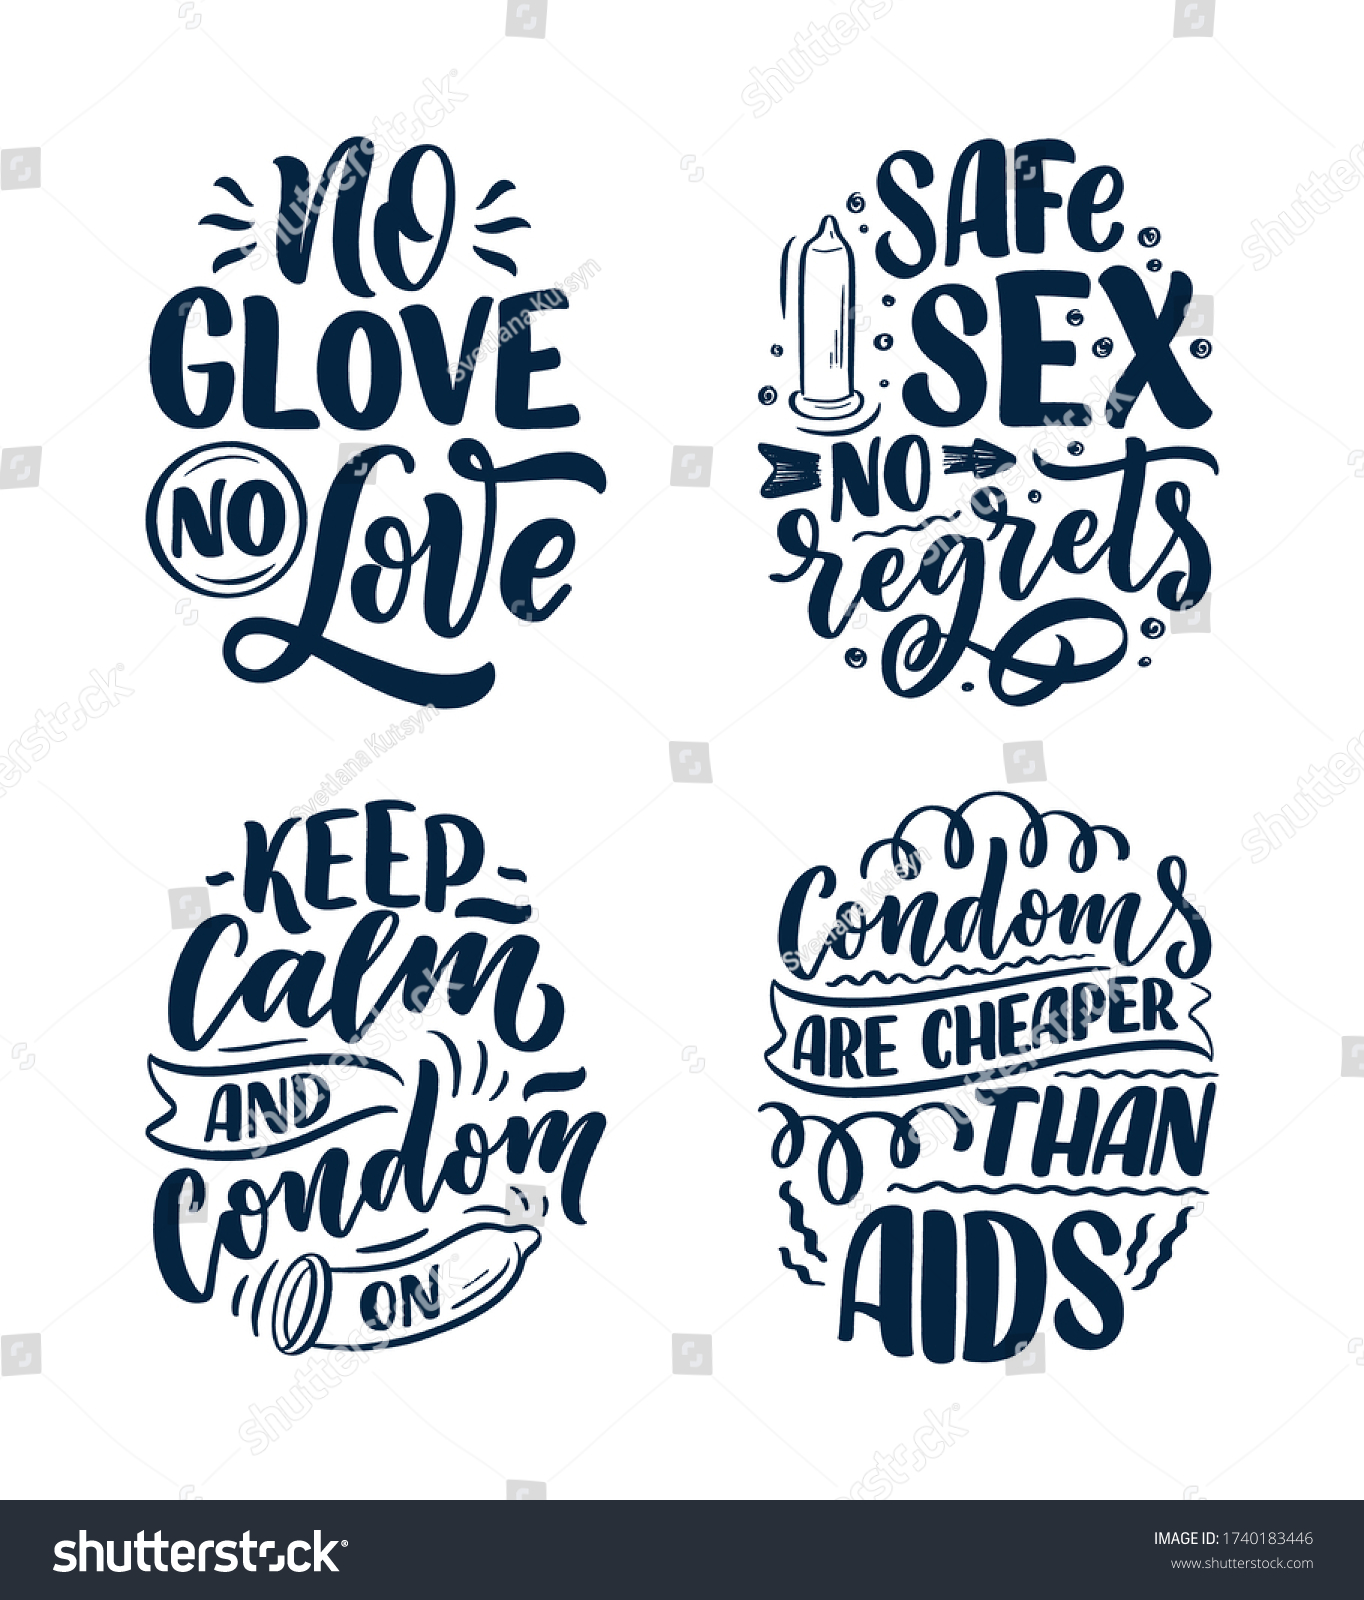 Safe Sex Slogans Great Design For Any Purposes Royalty Free Stock Vector 1740183446 1511